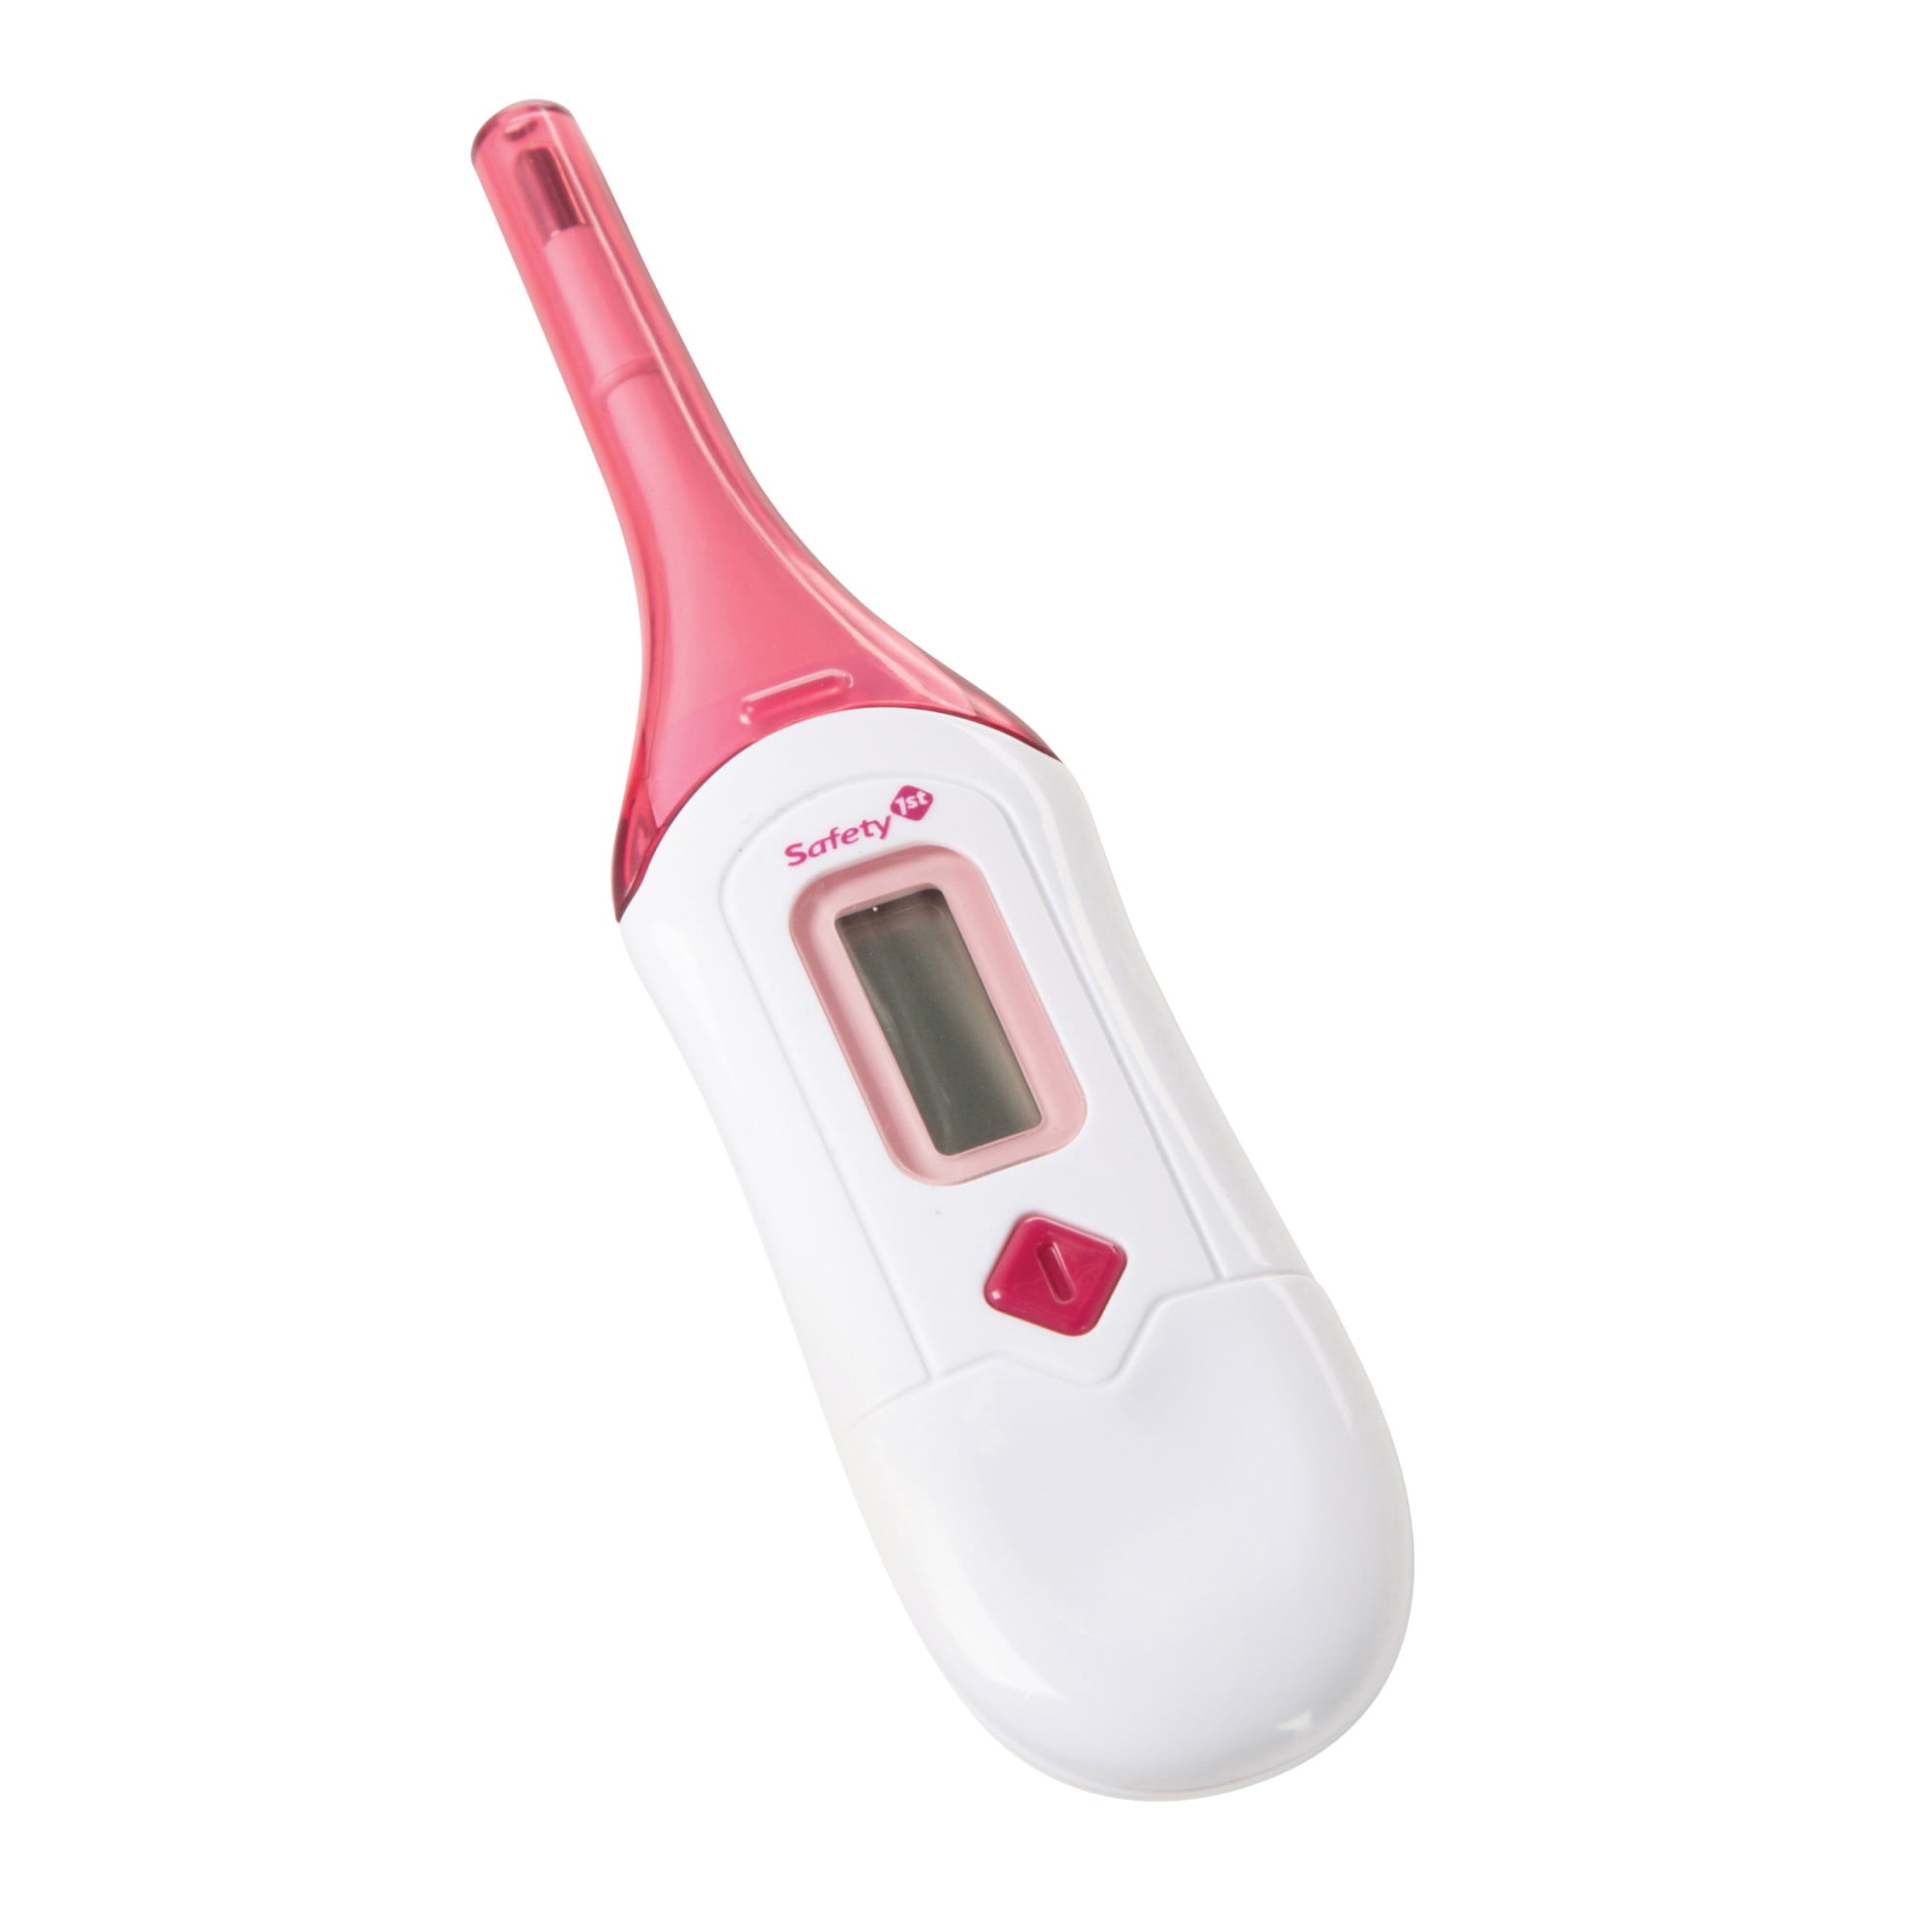 Safety 1st 3-in-1-Nursery Thermometer 